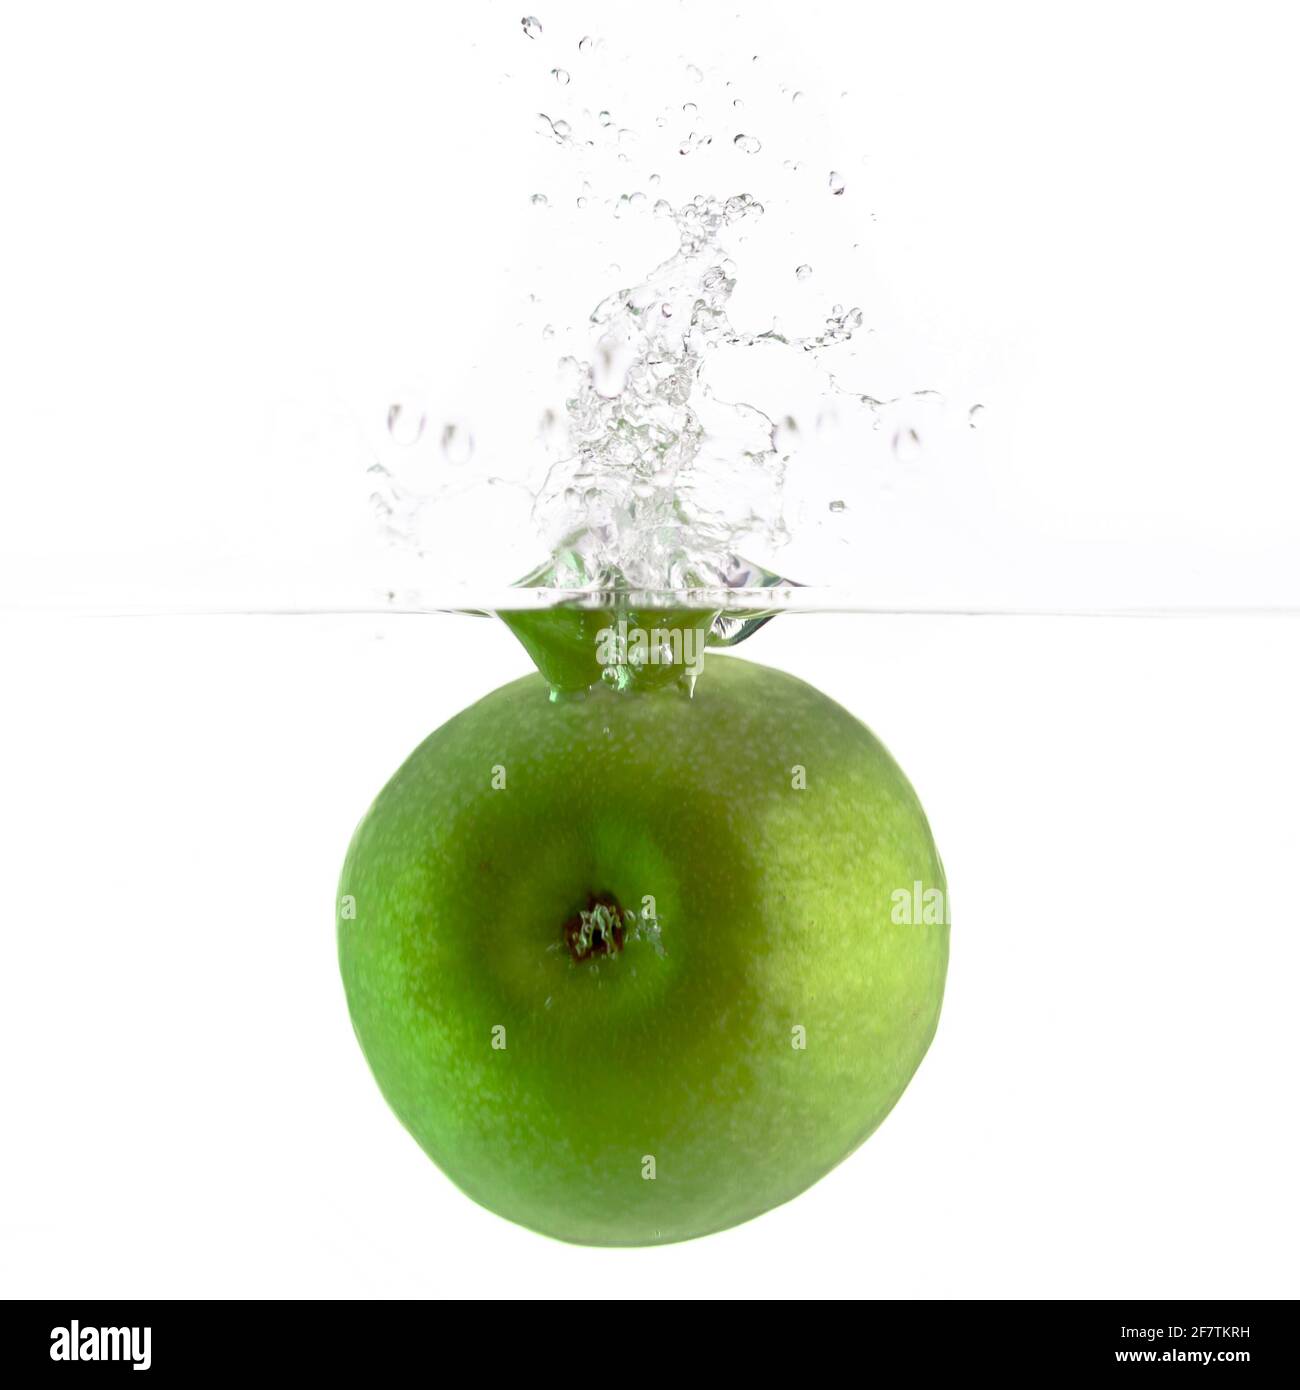 one green apple falling into water on a white background with splashes, drops and bubbles Stock Photo